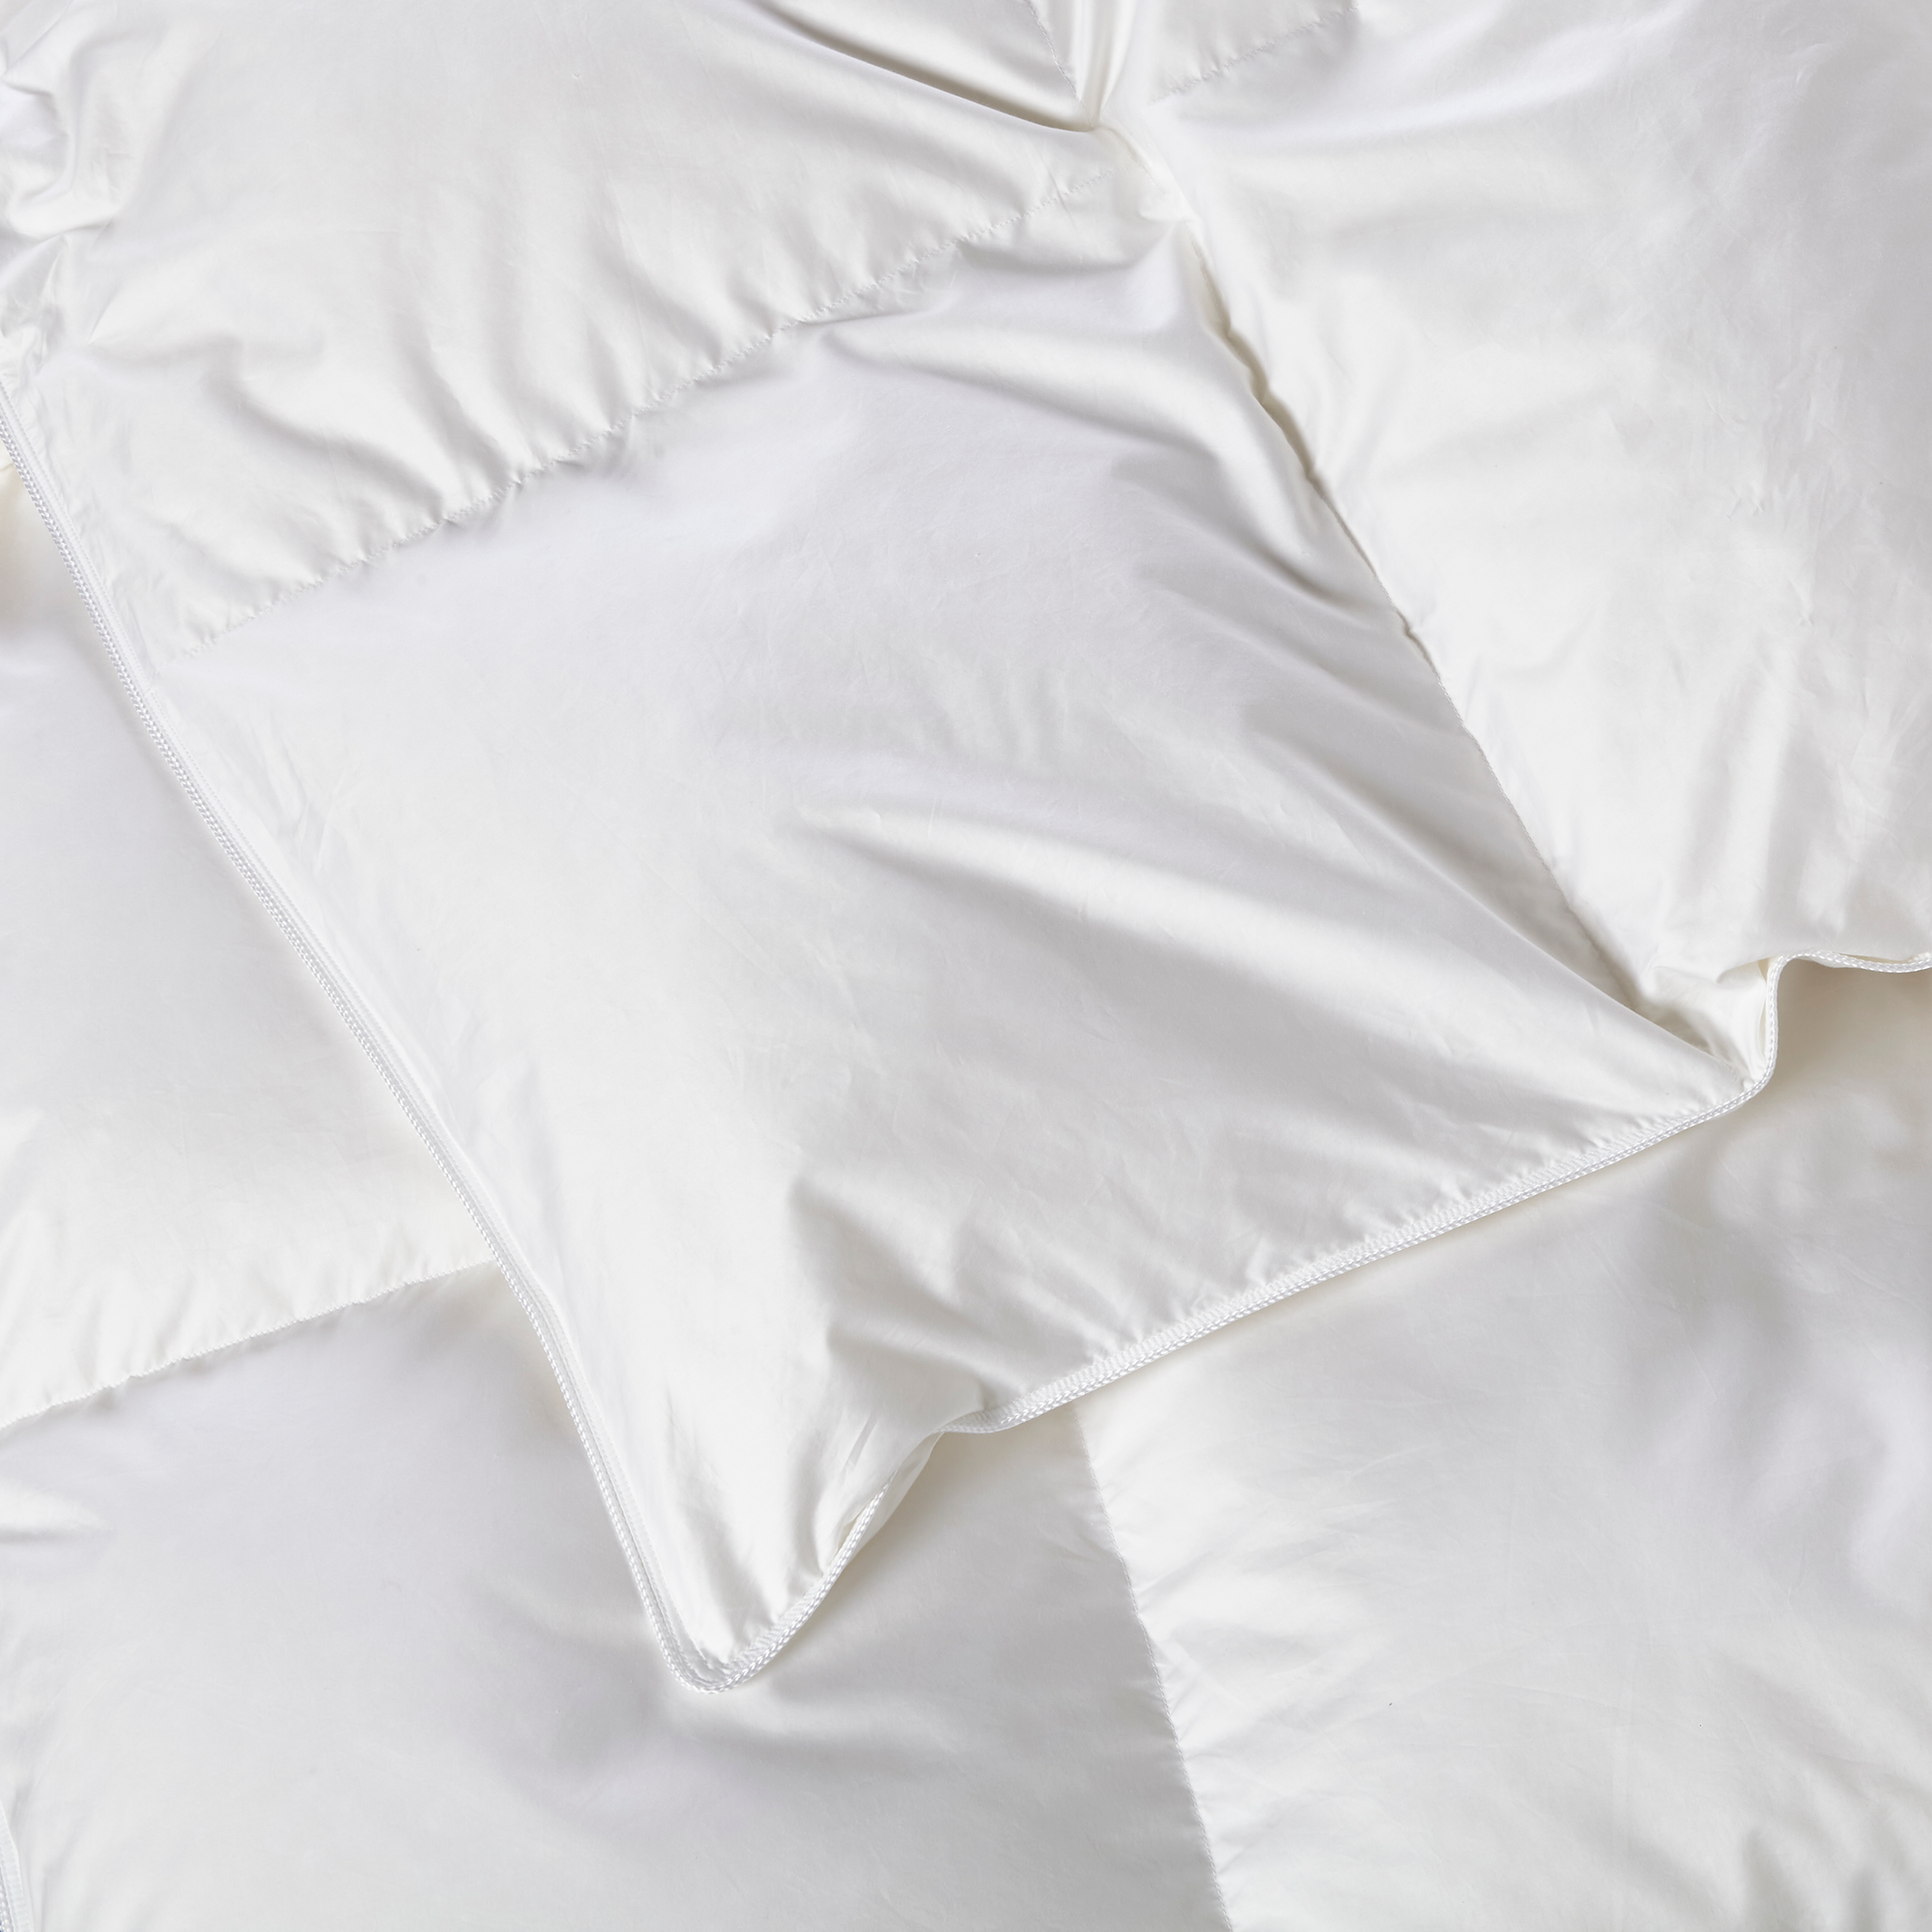 This luxurious duvet is made with white goose down - renowned worldwide for its outstanding insulation and fill power.